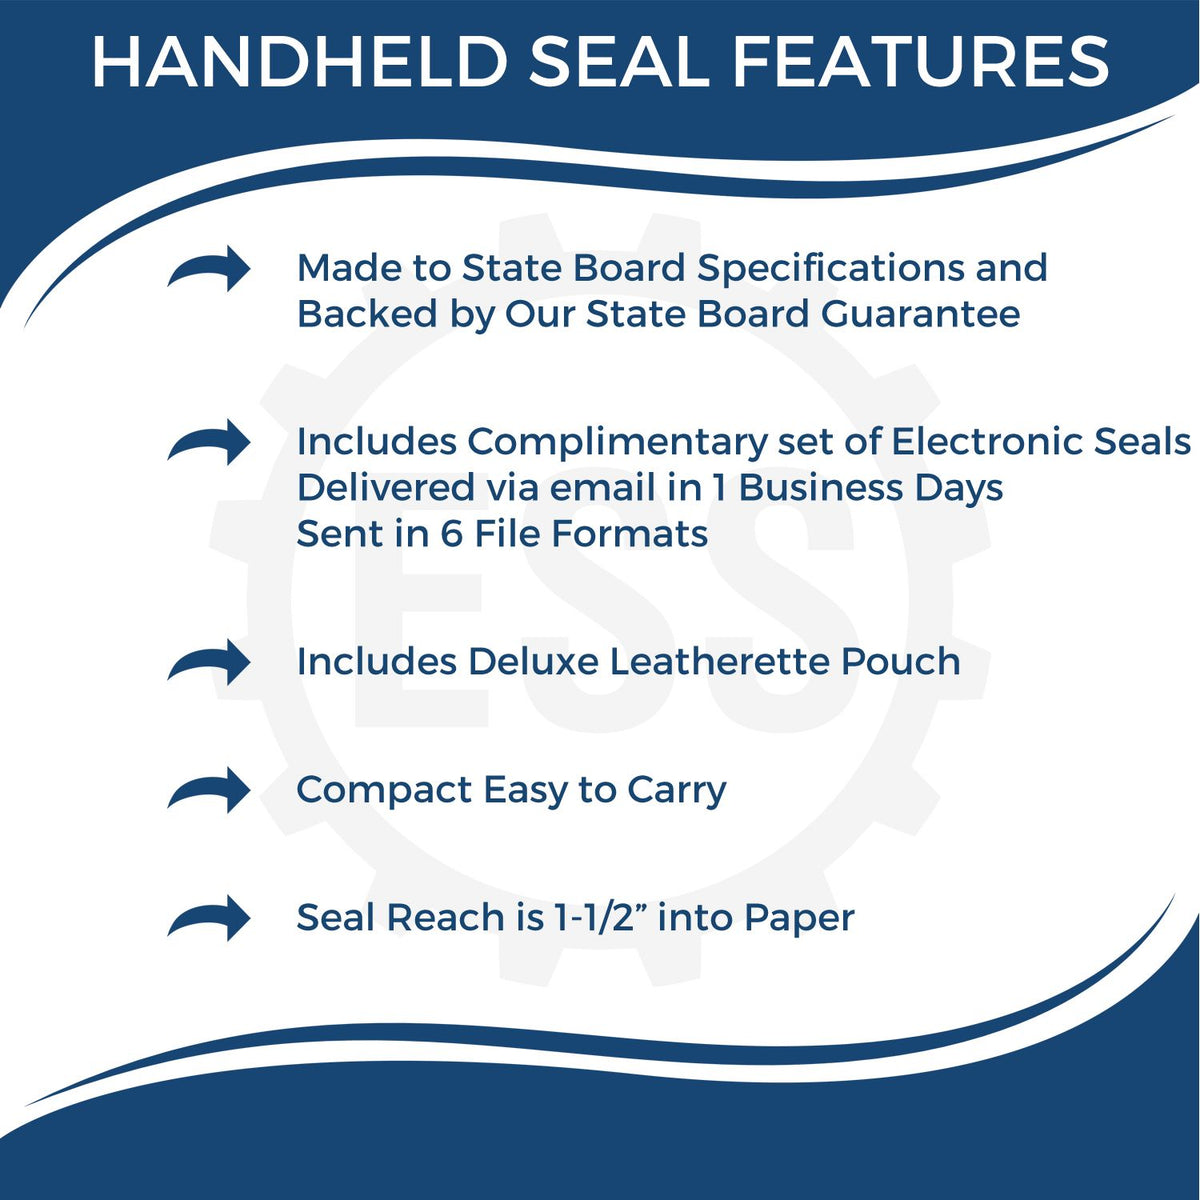 A picture of an infographic highlighting the selling points for the Handheld Massachusetts Land Surveyor Seal